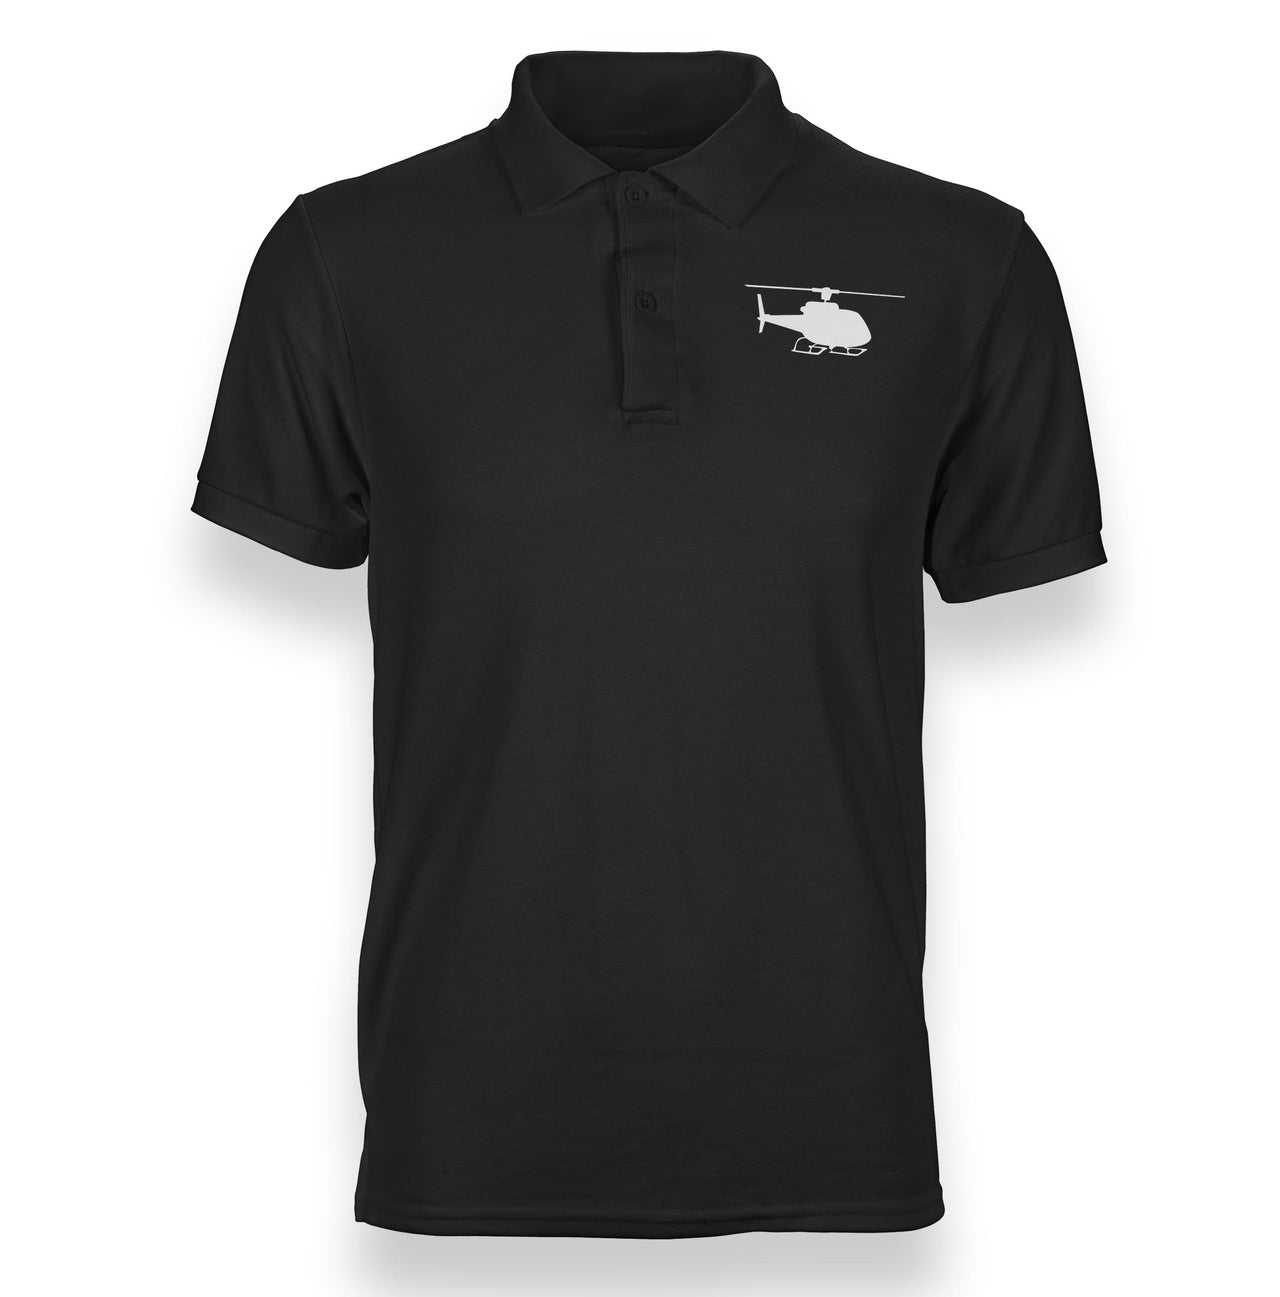 Helicopter Silhouette Designed Polo T-Shirts